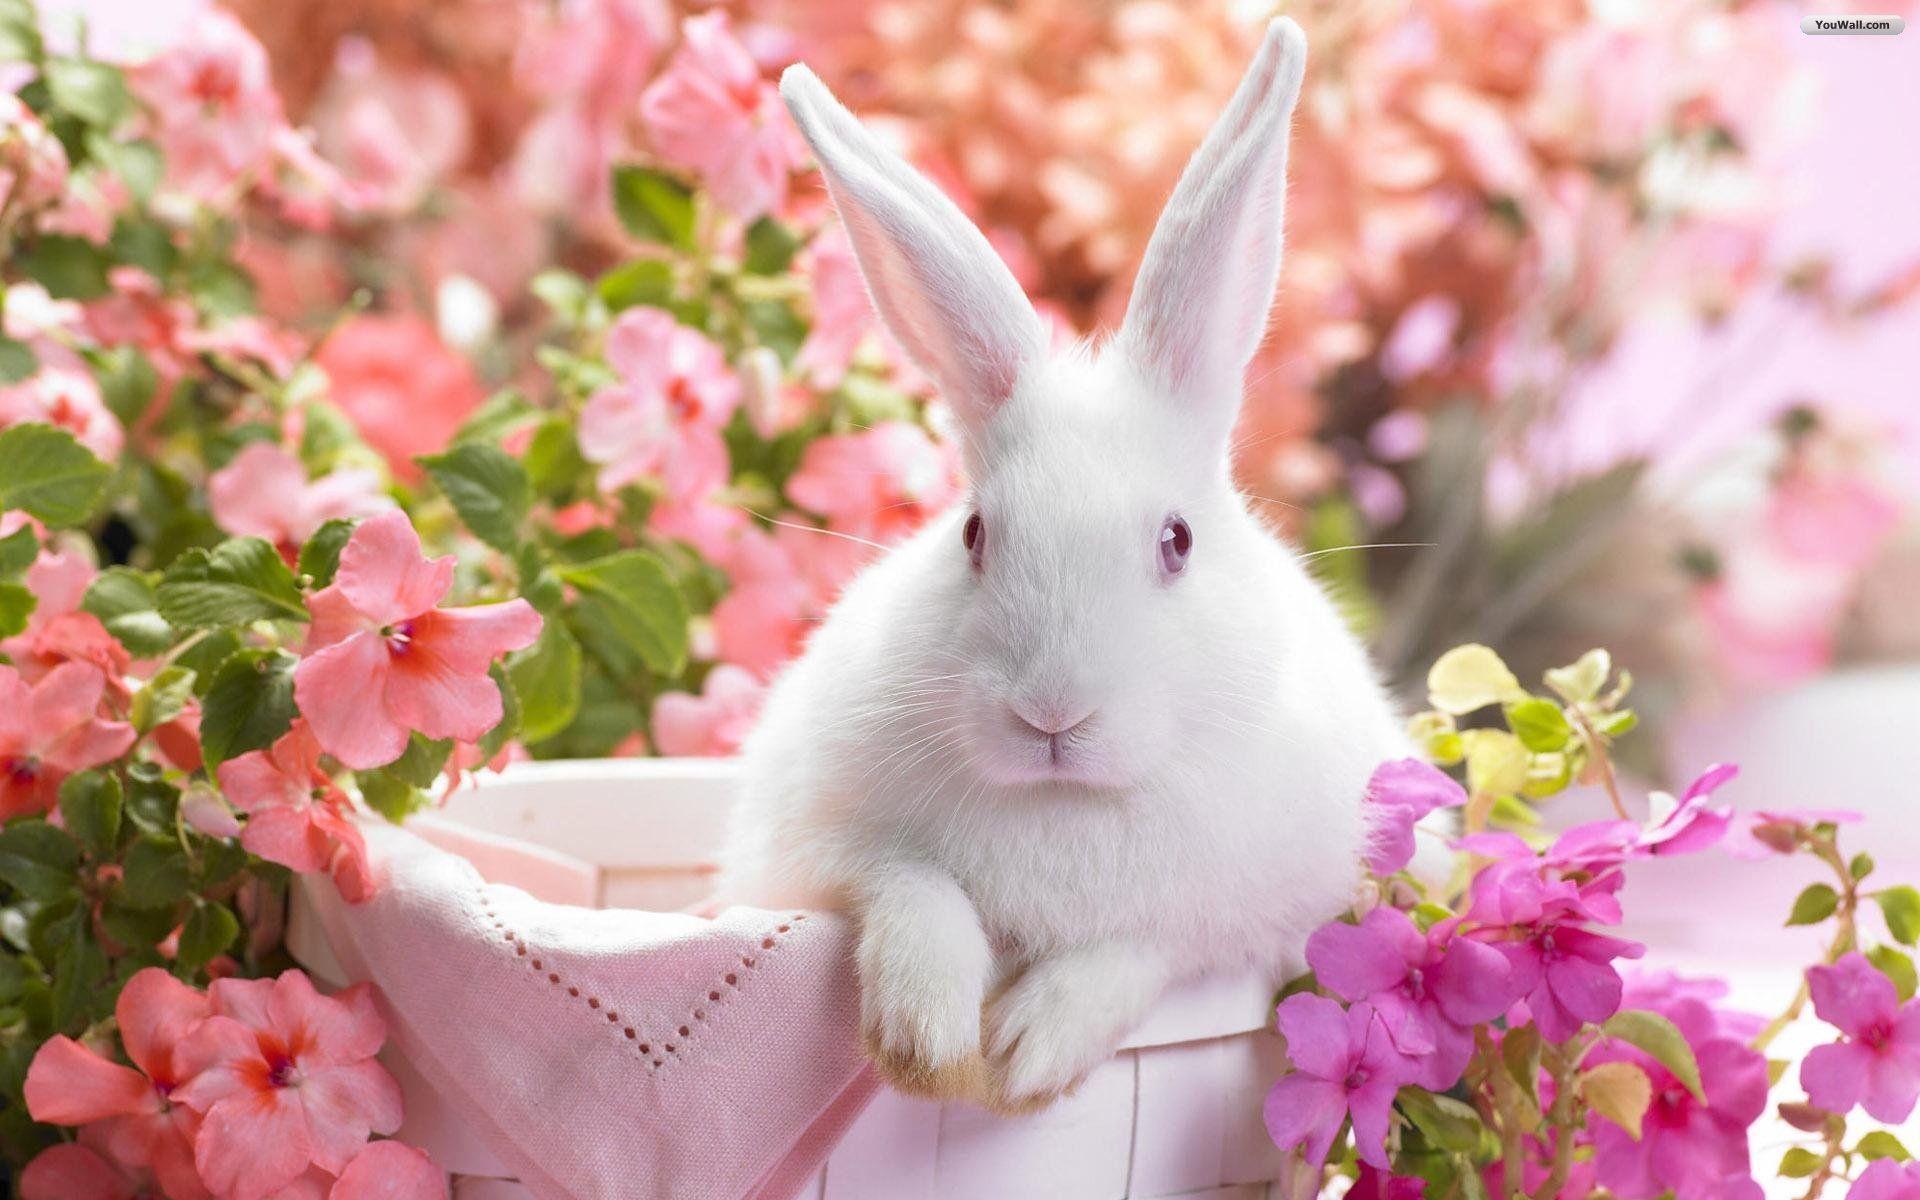 Cute Bunny Wallpaper Image & Picture